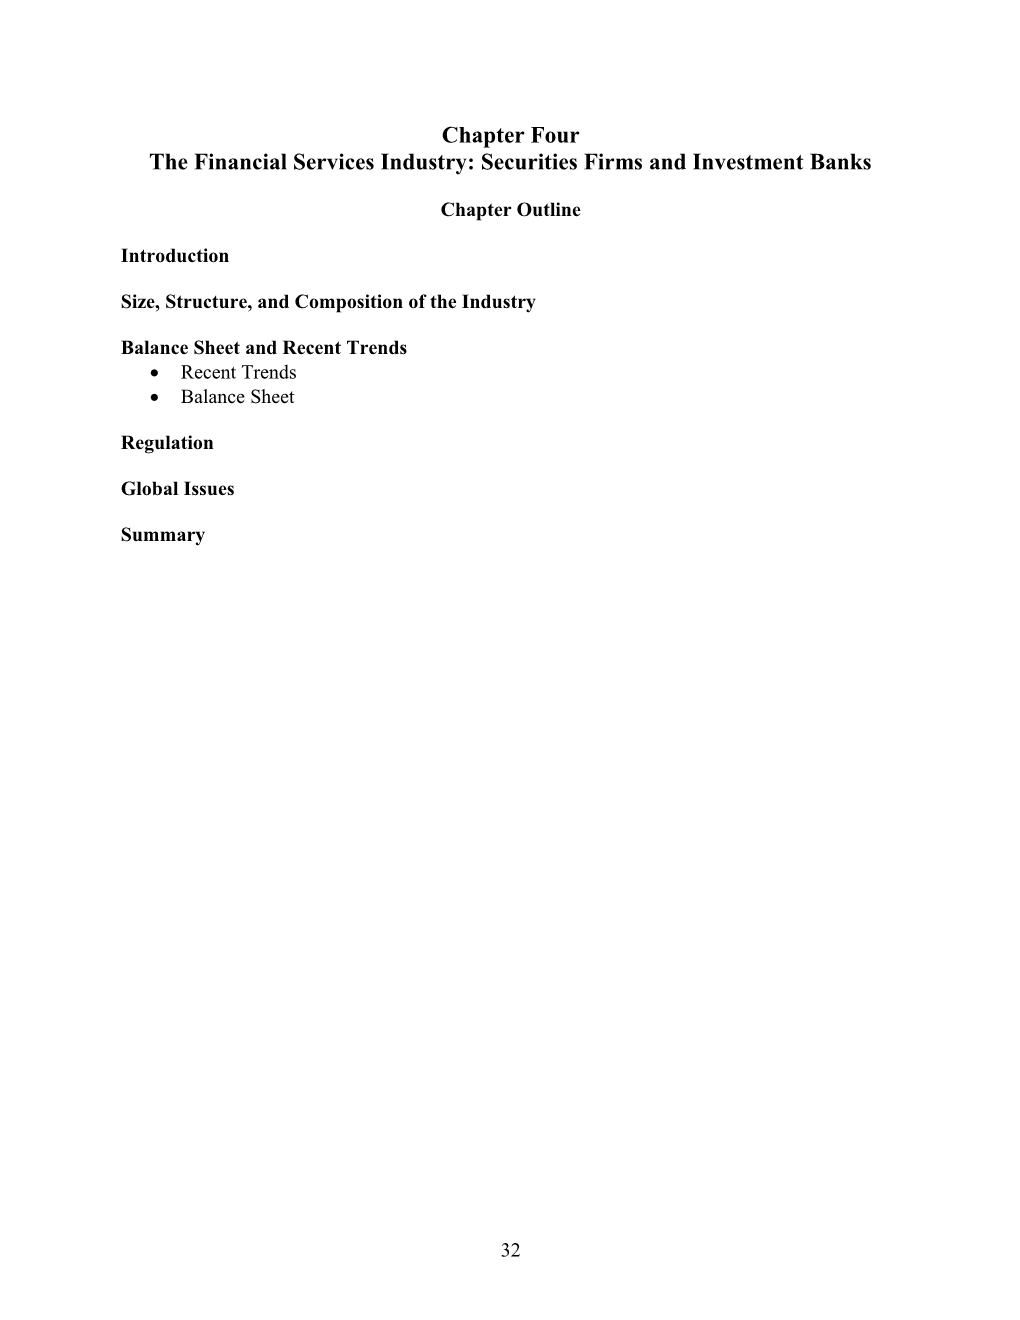 The Financial Services Industry: Securities Firms and Investment Banks